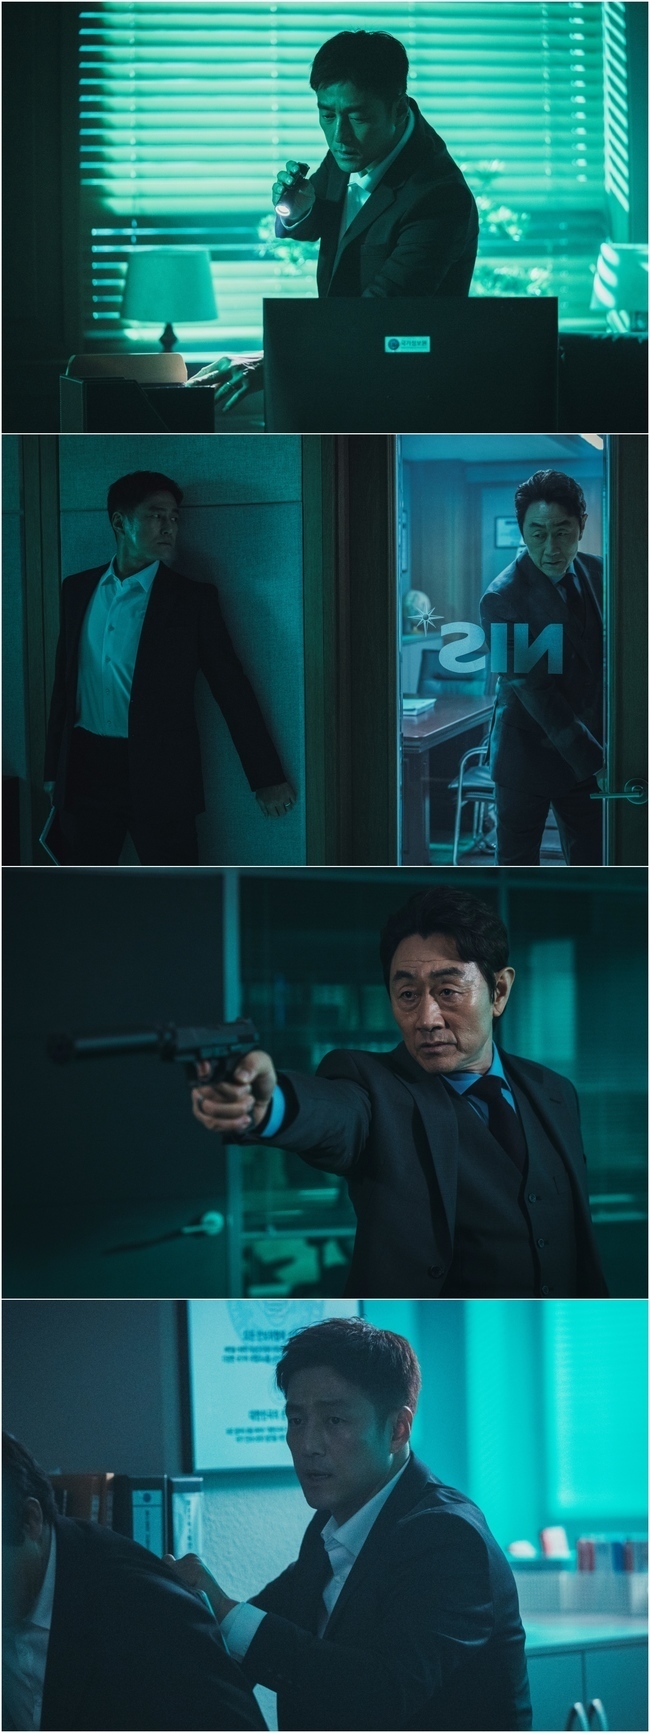 Ji Jin-hee and Heo Joon-ho station Daechi.The JTBC gilt drama Undercover (playplayplayed by Song Ja-hoon and Baek Cheol-hyun/directed by Song Hyun-wook) unveiled the scene where Limited Express (Ji Jin-hee) infiltrated the NIS on June 11.The only evidence to punish Lim Hyung-rak (Heo Joon-ho) is the whereabouts of the tablet PC.Limited Express, which barely survived the death threshold in the last broadcast, joined forces with Choi Yeon-su (played by Kim Hyun-joo).He secured a recording file containing the circumstances in which Lim Hyung-rak and Yoo Sang-dong (Son Jong-hak) planned the election manipulation, and Choi Yeon-su and the airborne office urgently searched the safe house of Lim Hyung-rak.The threat and counterattack of Lim Hyung-rak against Choi Yeon-sus declaration of war, I will make sure I pay for the price that touched my family, was stirred and the result of a fierce battle was expected.The move by Limited Express is unusual: The dangerous move by Limited Express, which was sneaked into the NISs keynote chief, is curious.He is looking for a tablet PC with the Smoking Gun of events related to Lim Hyung-rak. His eyes are moving in the dark and his fingers are full of urgency.Lim Hyung-raks silhouette, revealed in the subsequent photos, heightens tension.Lim Hyung-rak, who is slowly approaching the door, is in a state of dizzying the immediate crisis of Limited Express, which became a rat in the poison.But eventually two people in the Daechi station situation.Lim Hyung-raks life and angry eyes, which aim at the limited Express, add to their curiosity about their last confrontation.